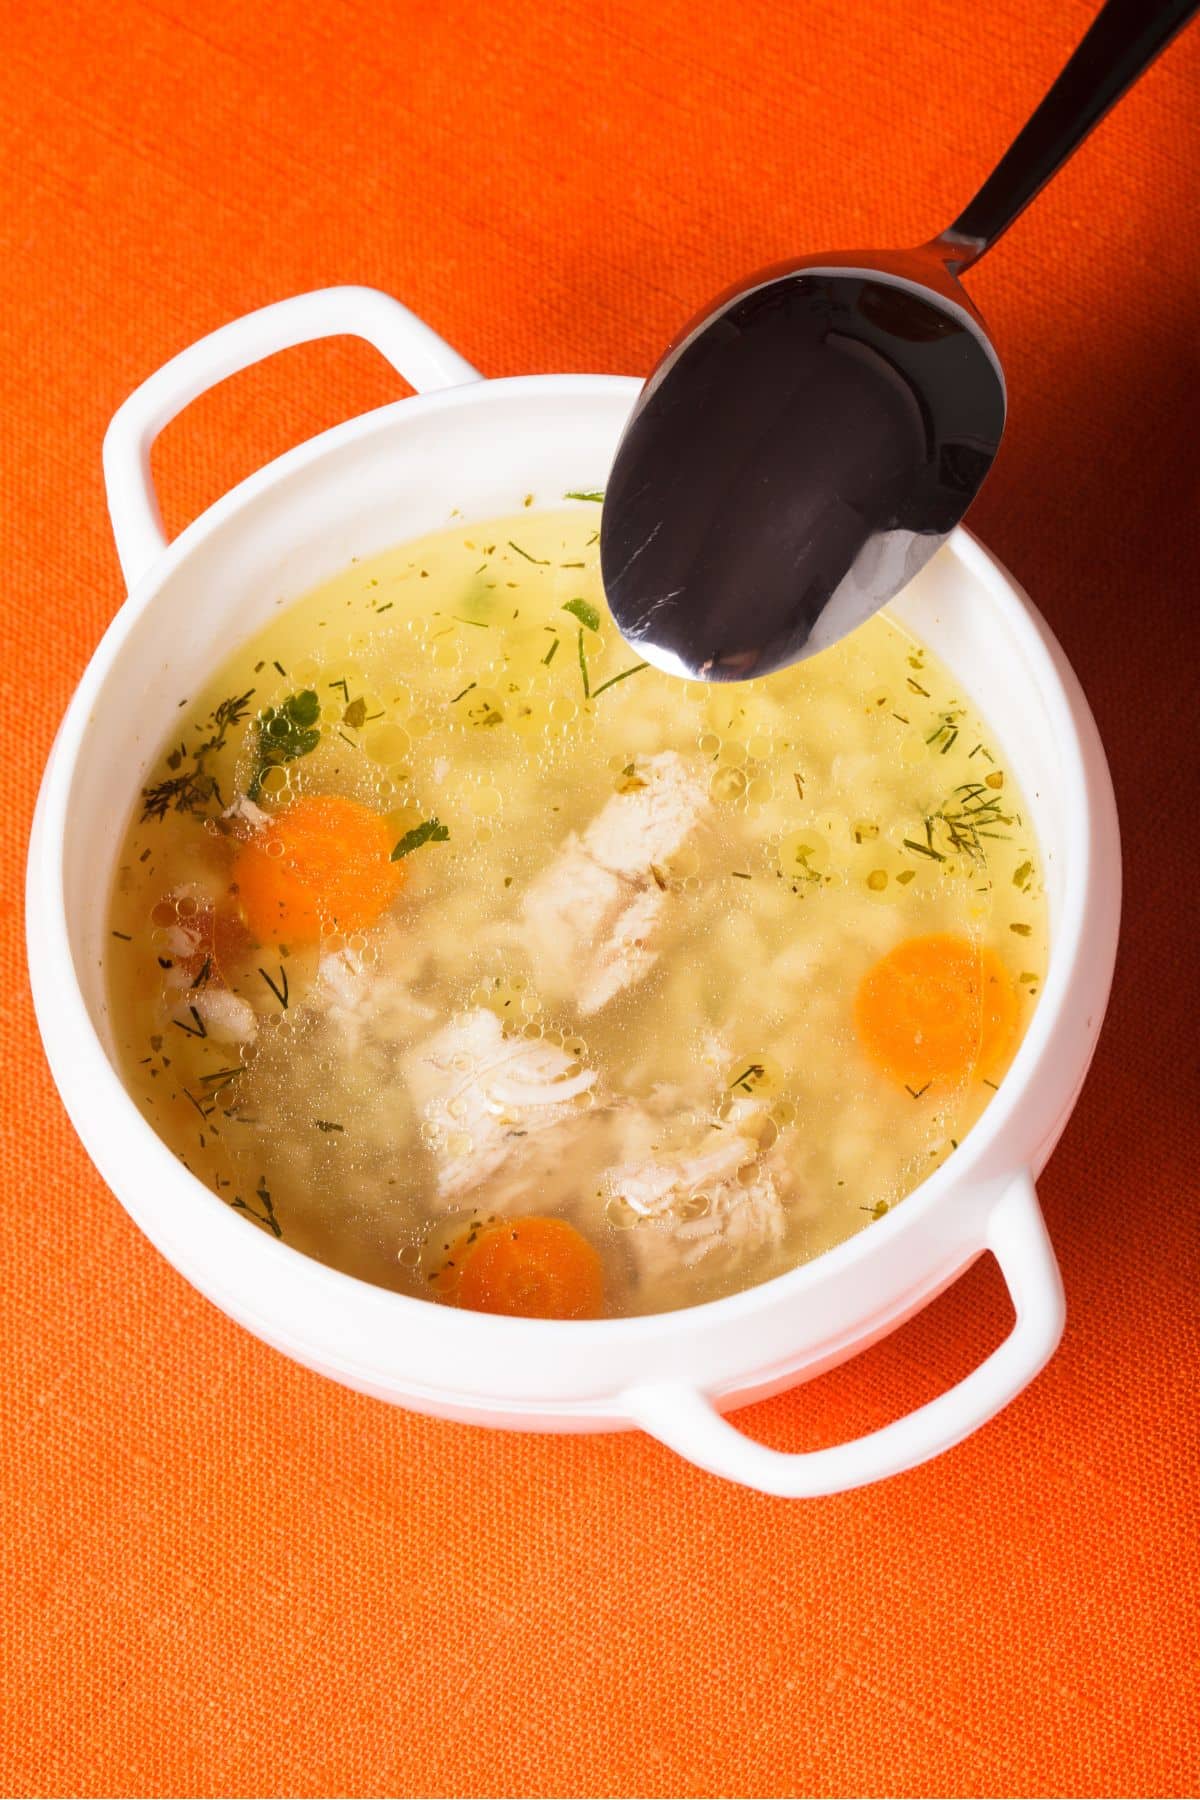 A bowl of chicken broth sitting on a vibrant orange background.